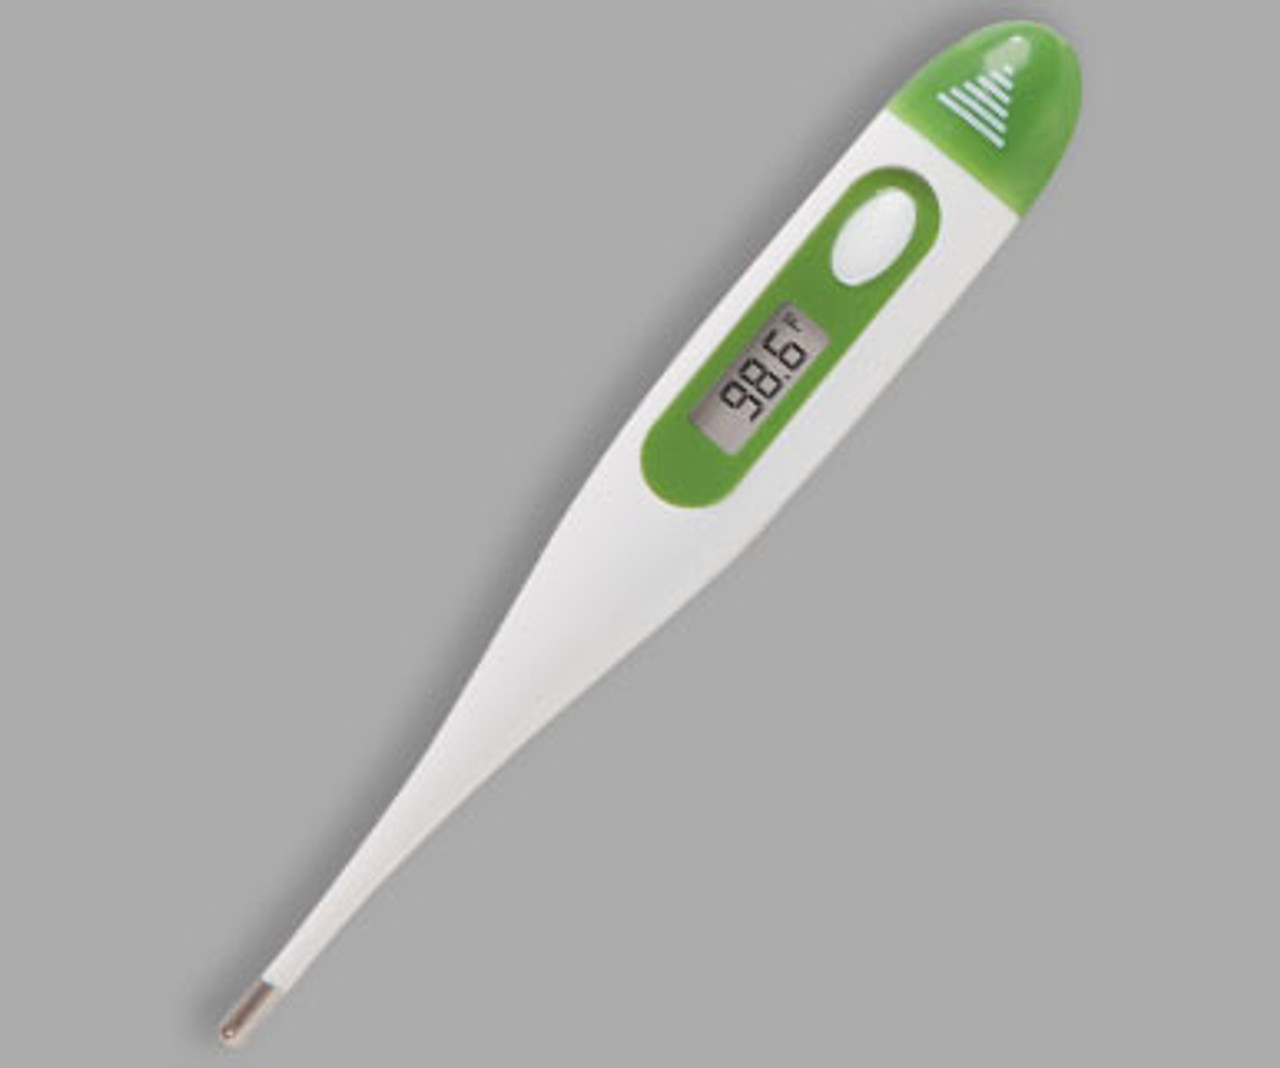 Veridian Healthcare 60 Second Digital Thermometer 08-352